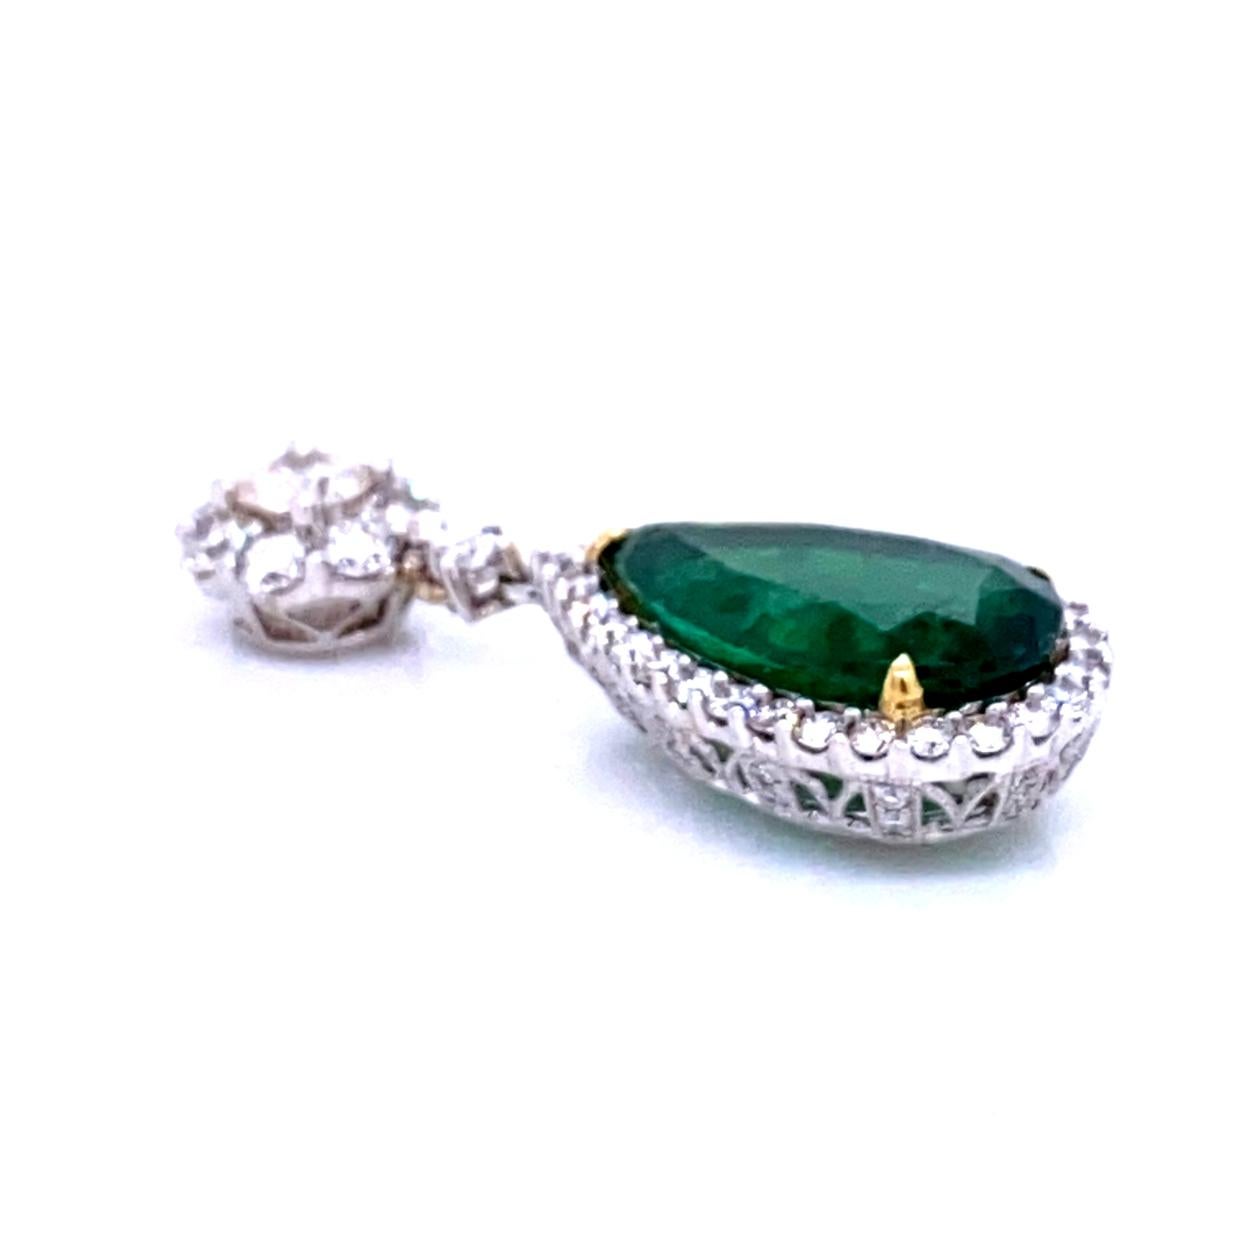 7.00 Carat Pear Shape Emerald Pendant in 18K Gold with 1.85 Carat Diamonds Halo In New Condition For Sale In Los Angeles, CA